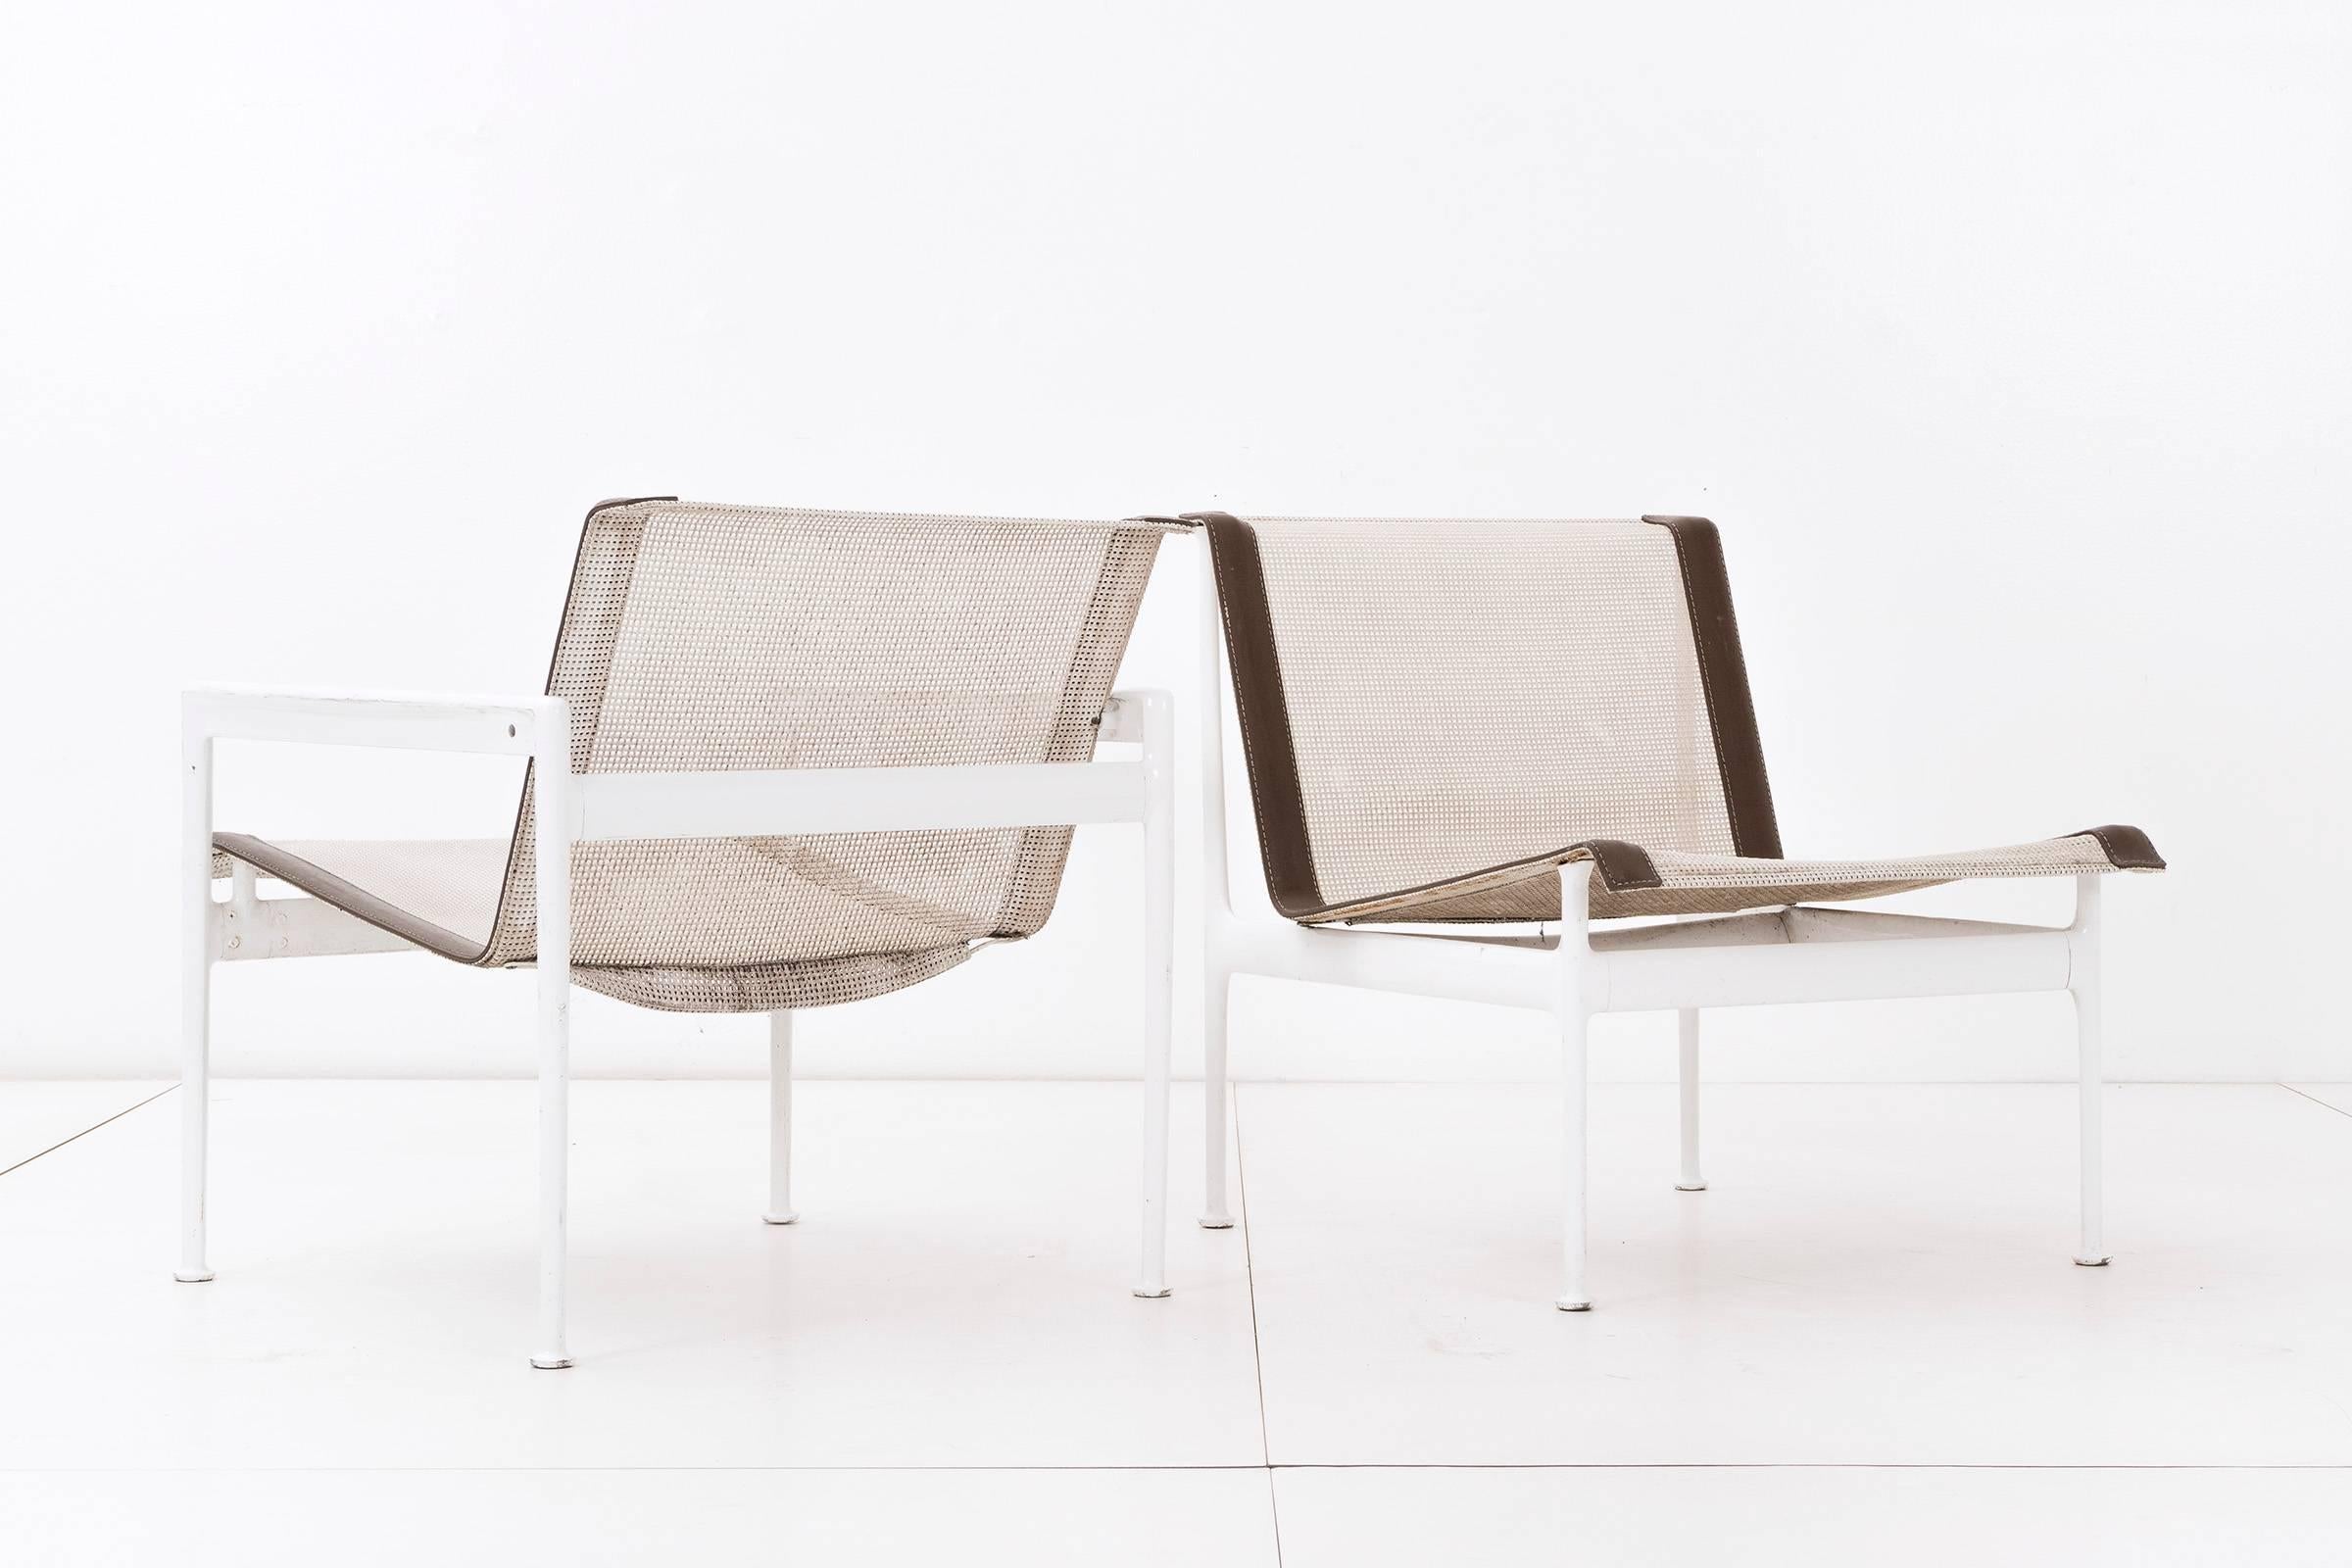 Richard Schultz 1966 series for Knoll. Outdoor lounge chair with arms Model no. 1966-25. Seat and back are woven vinyl coated polyester mesh with vinyl straps and stainless steel support and connects. The frame is cast and extruded aluminum with a